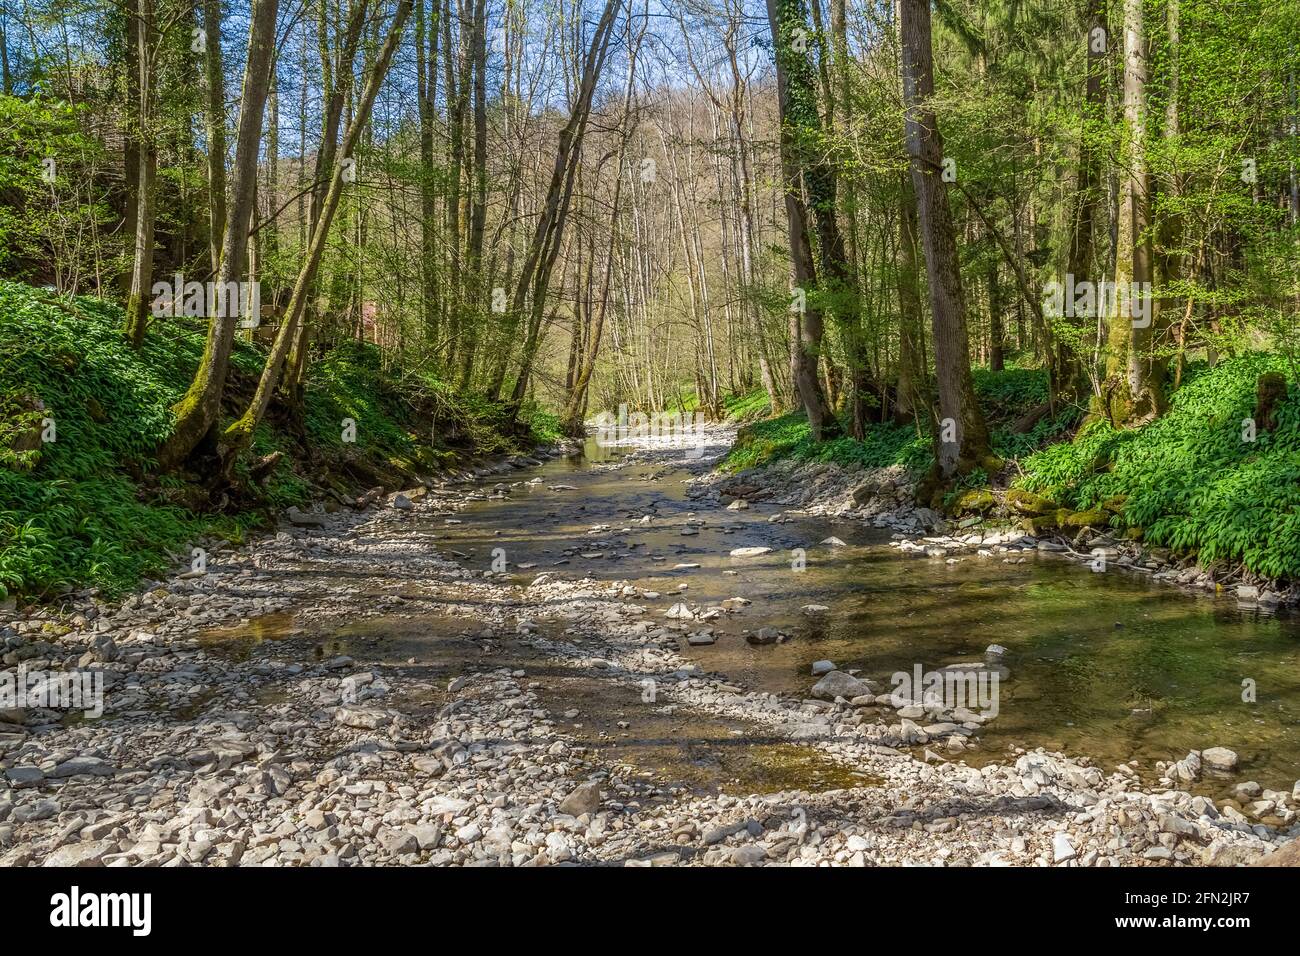 Idyllic scenery at river Kupfer in Hohenlohe, an area in Southern Germany at early spring time Stock Photo